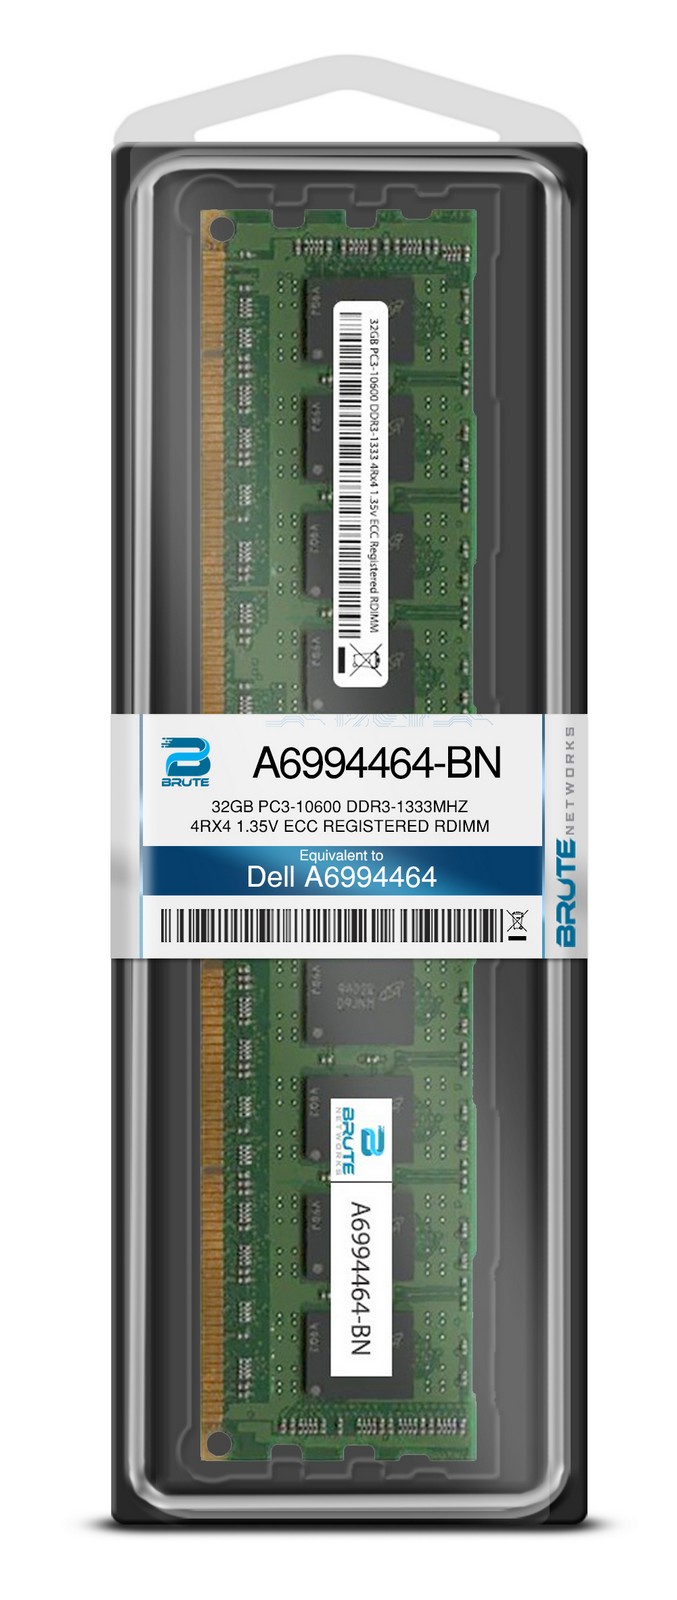 A6994464 - Dell Compatible 32GB PC3-10600 DDR3-1333Mhz 4Rx4 1.35v ECC Registered RDIMM - image 2 of 2